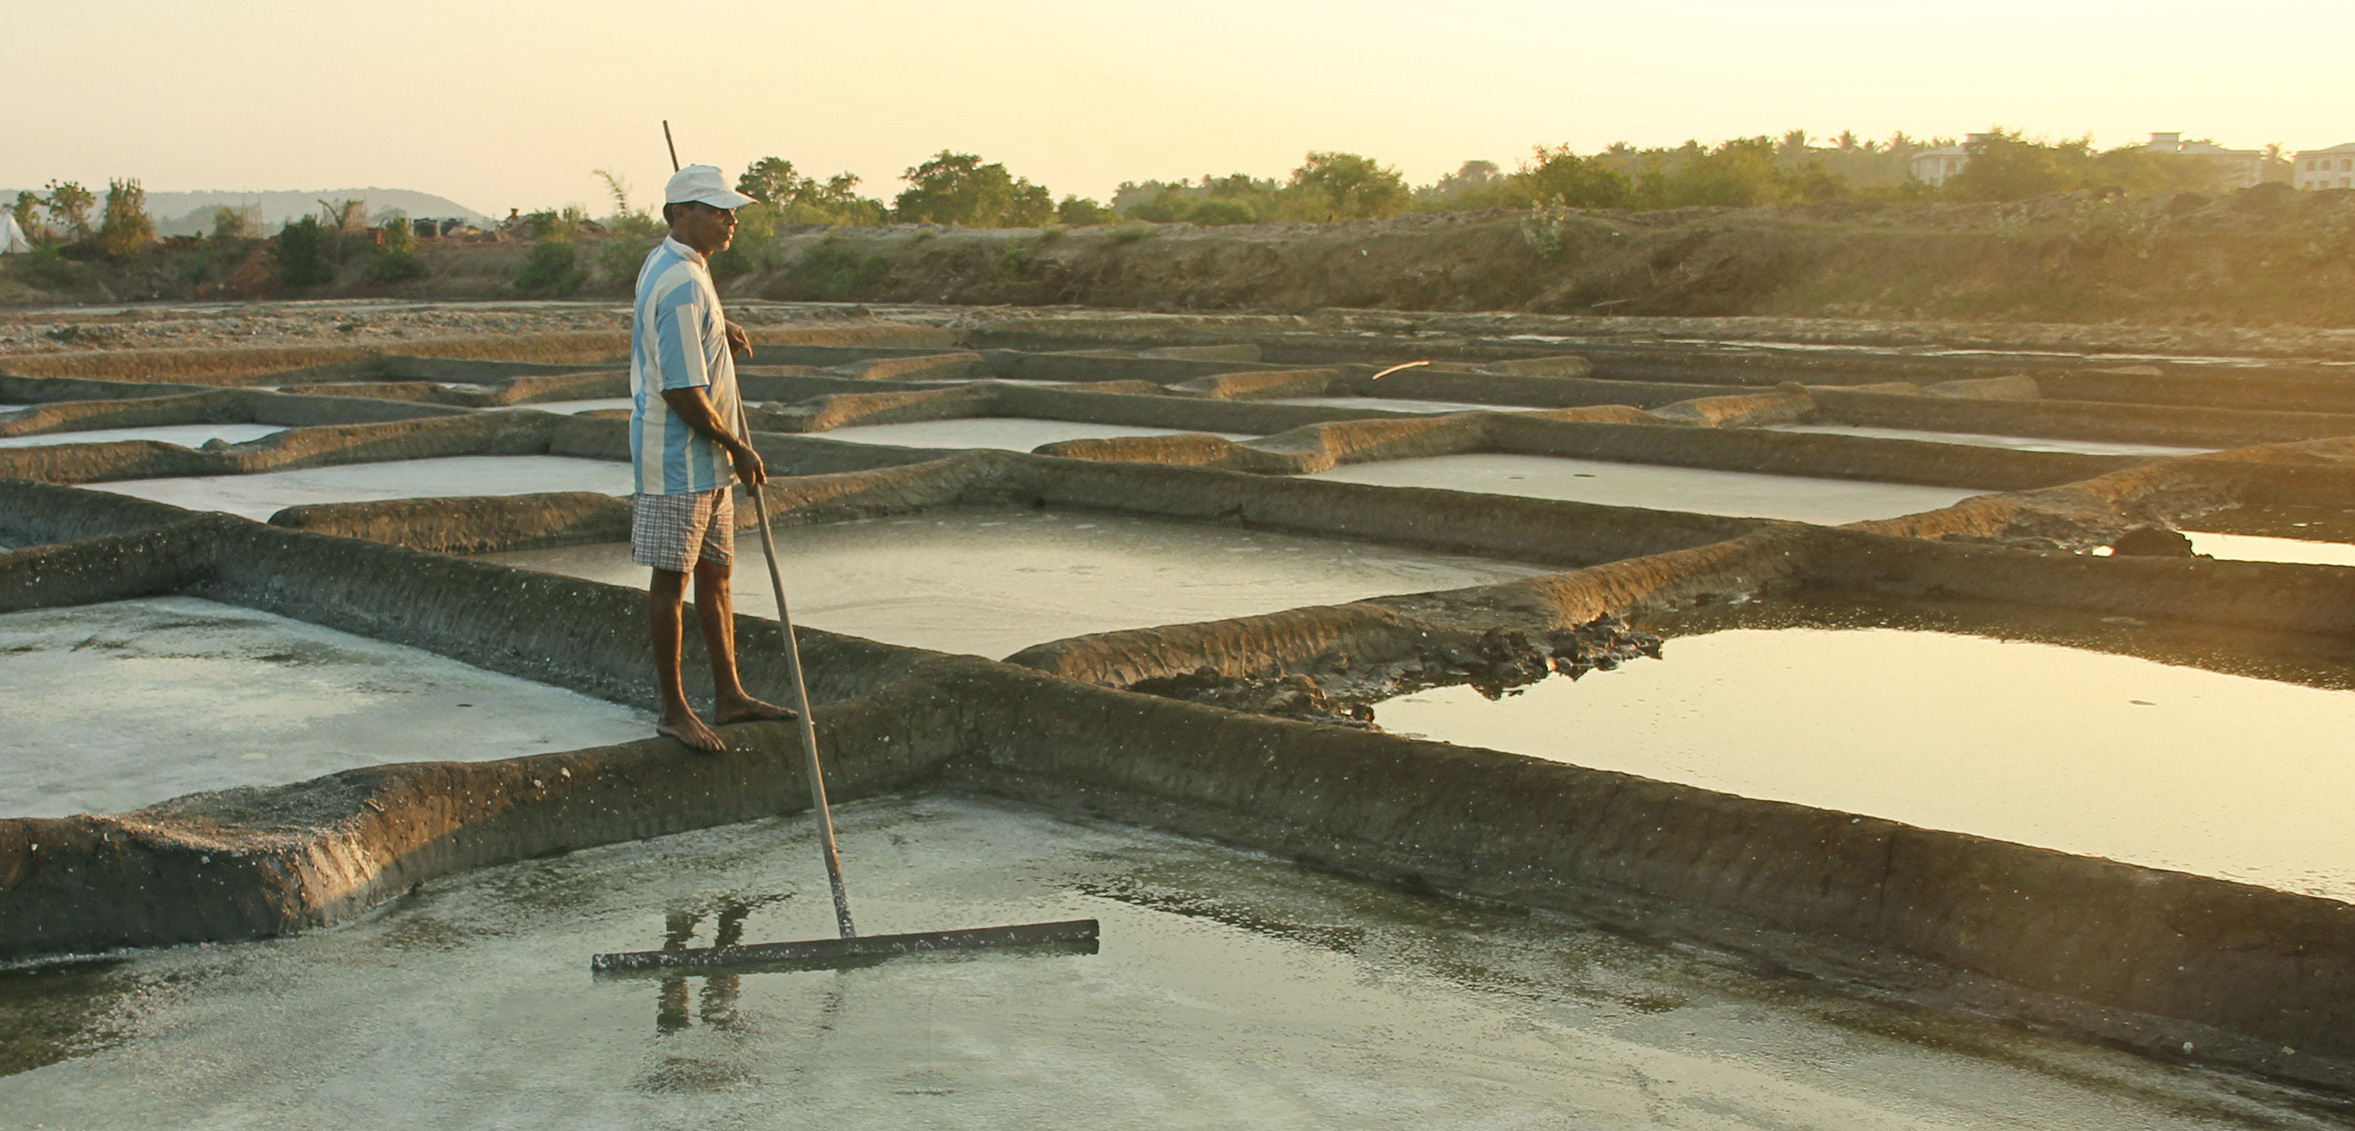 Pravin Bagli, one of the few remaining traditional salt makers in Goa, India, works on his salt pan near the Chapora River. Photo by Glenda D’Souza